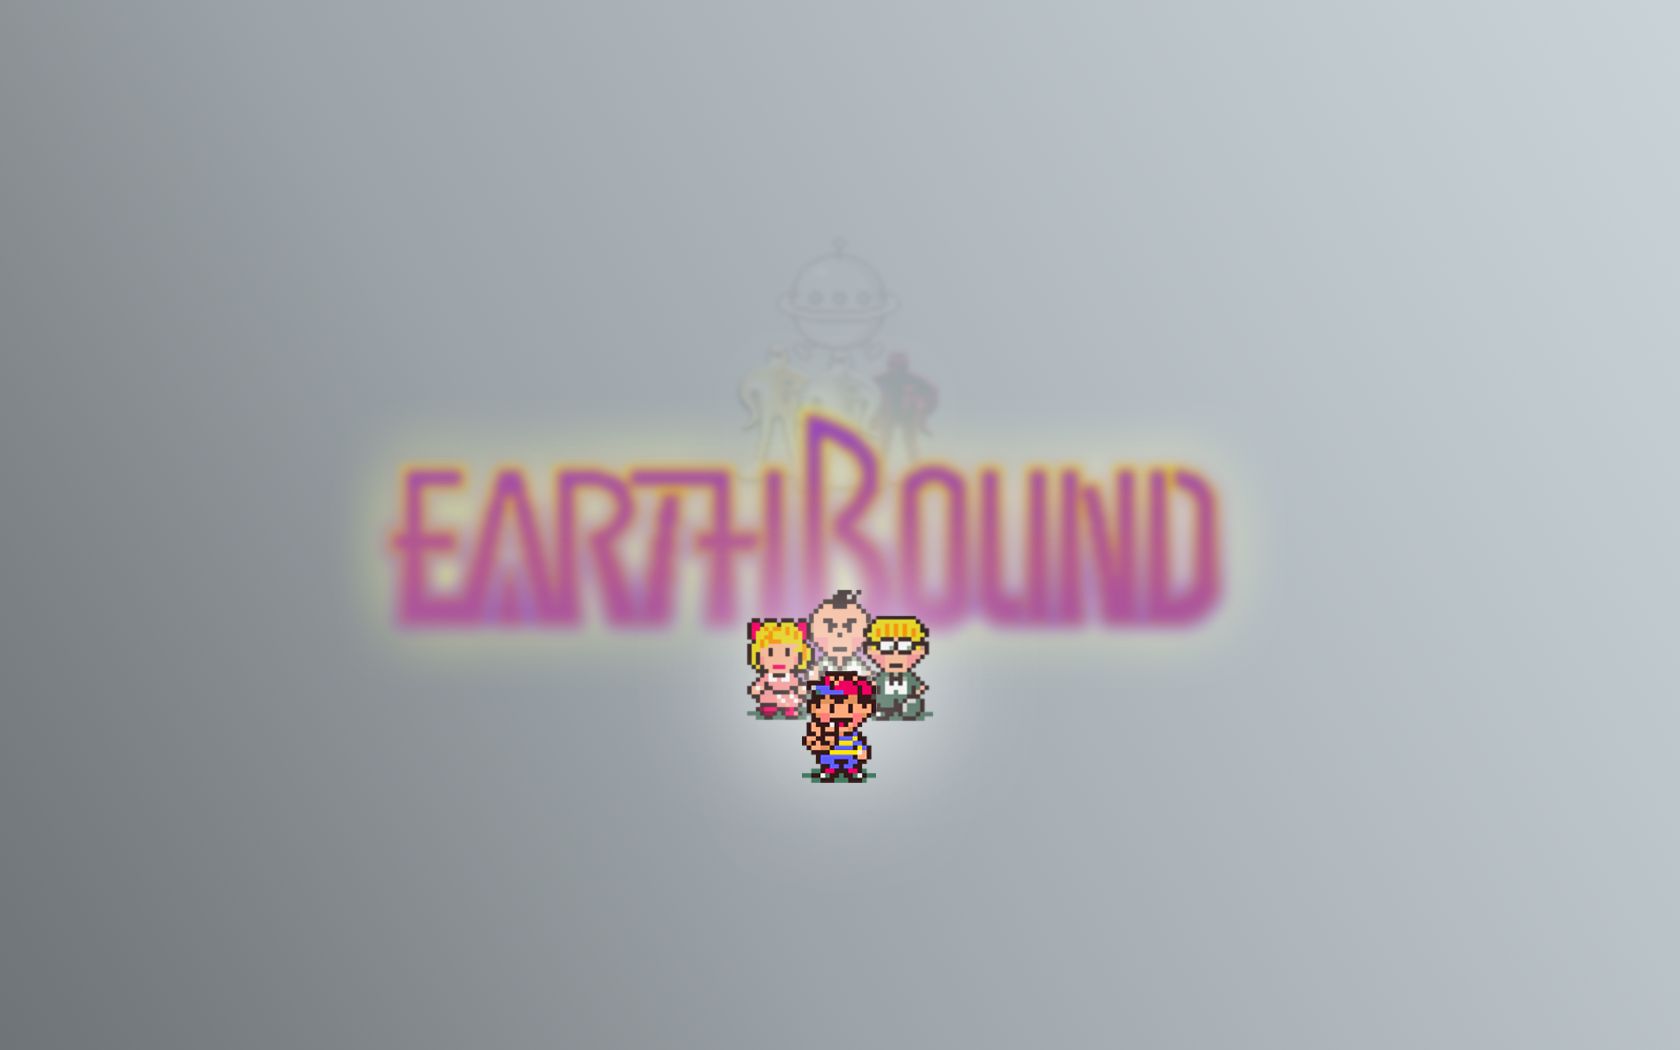 video game, earthbound